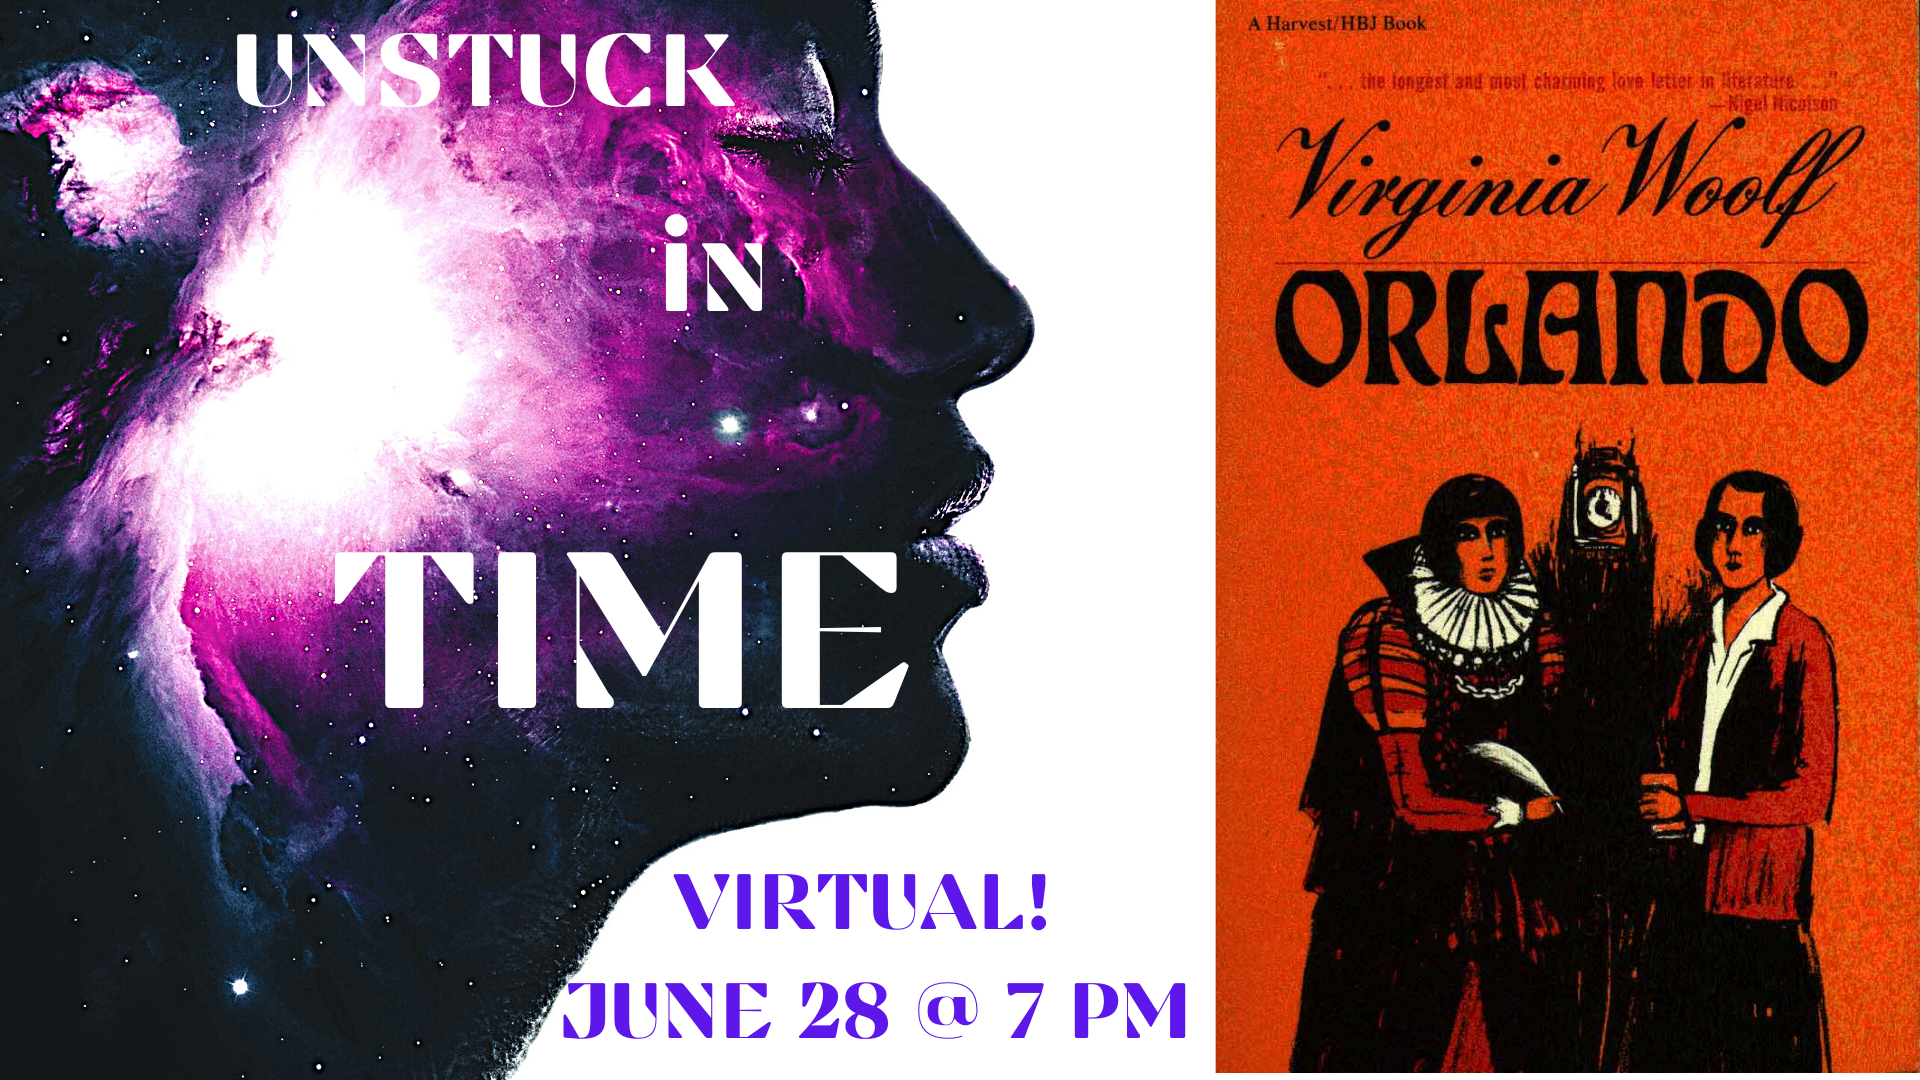 Banner advertising our UNSTUCK IN TIME book club on June 28 at 7 PM, featuring the cover of Virginia Woolf's ORLANDO.